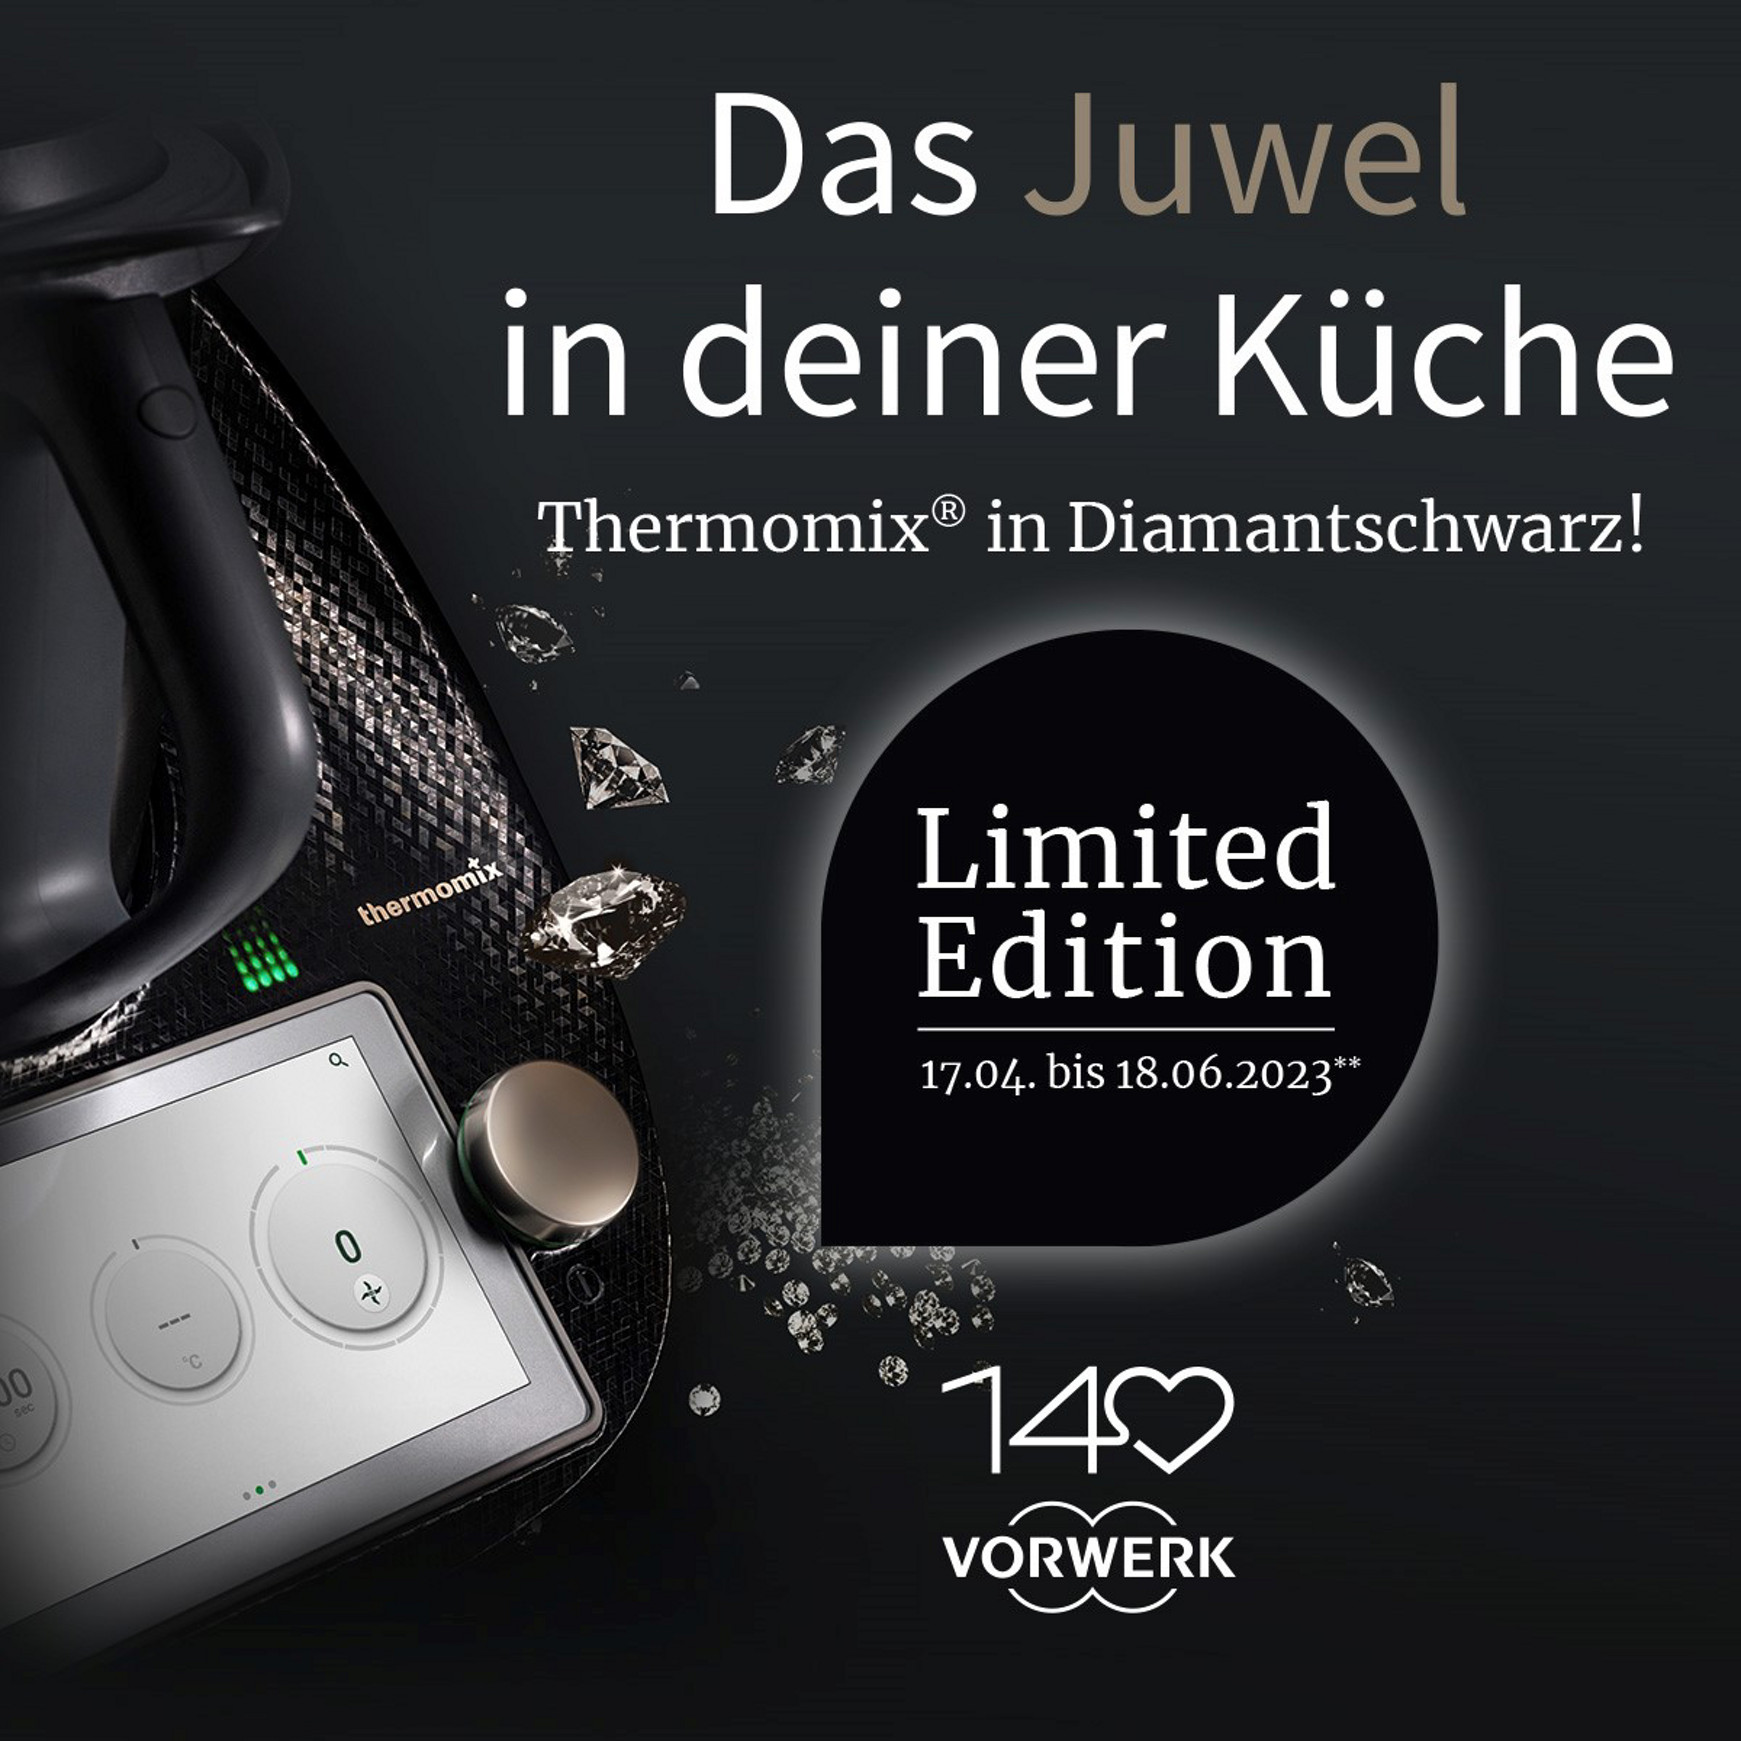 thermomix Website Aktuelle Angebote Teaser 1200x1200